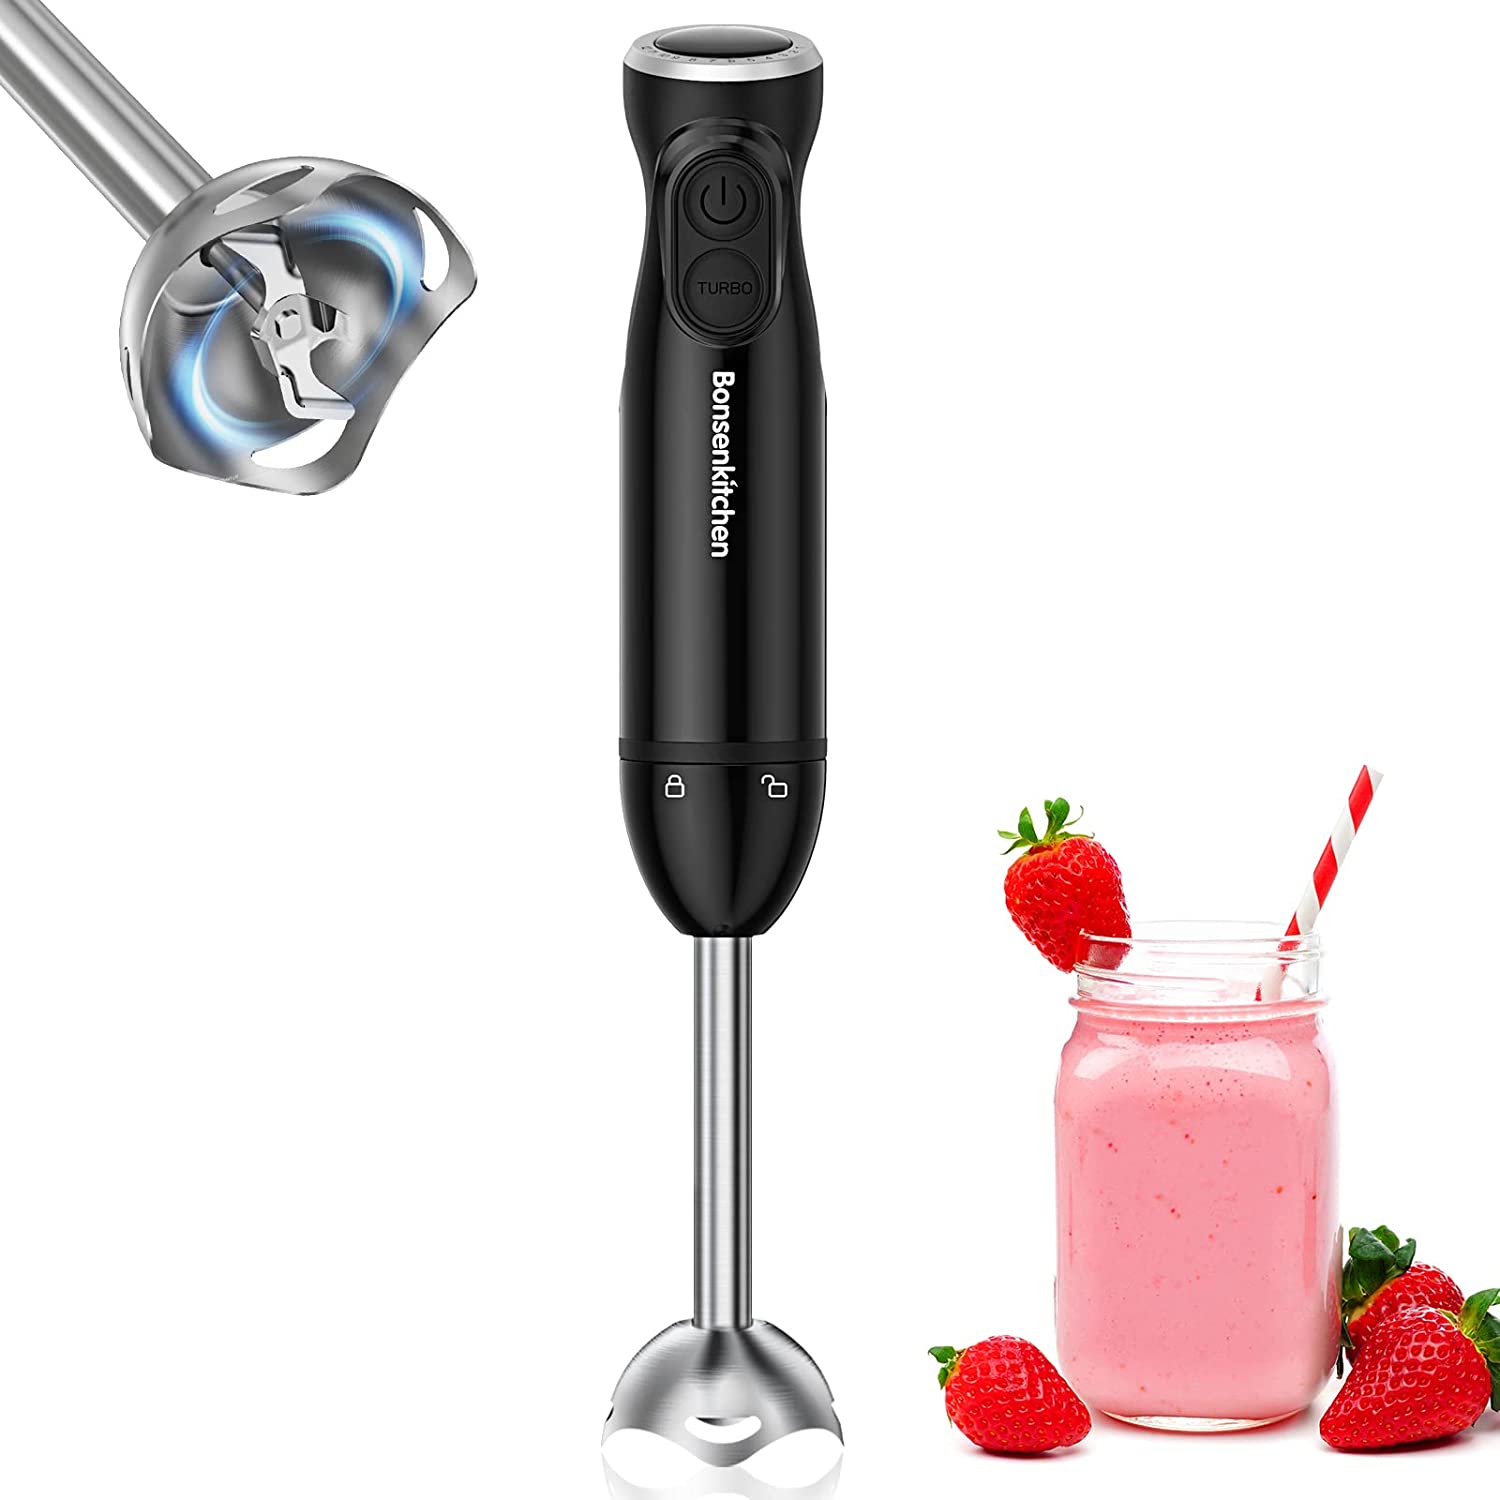 1 Basic Kitchen Handheld Blender, 2 Types of Speed Control 12 Variable Speeds or Turbo, Immersion Blender Stick Mixer w/ Stainless Steel Blades